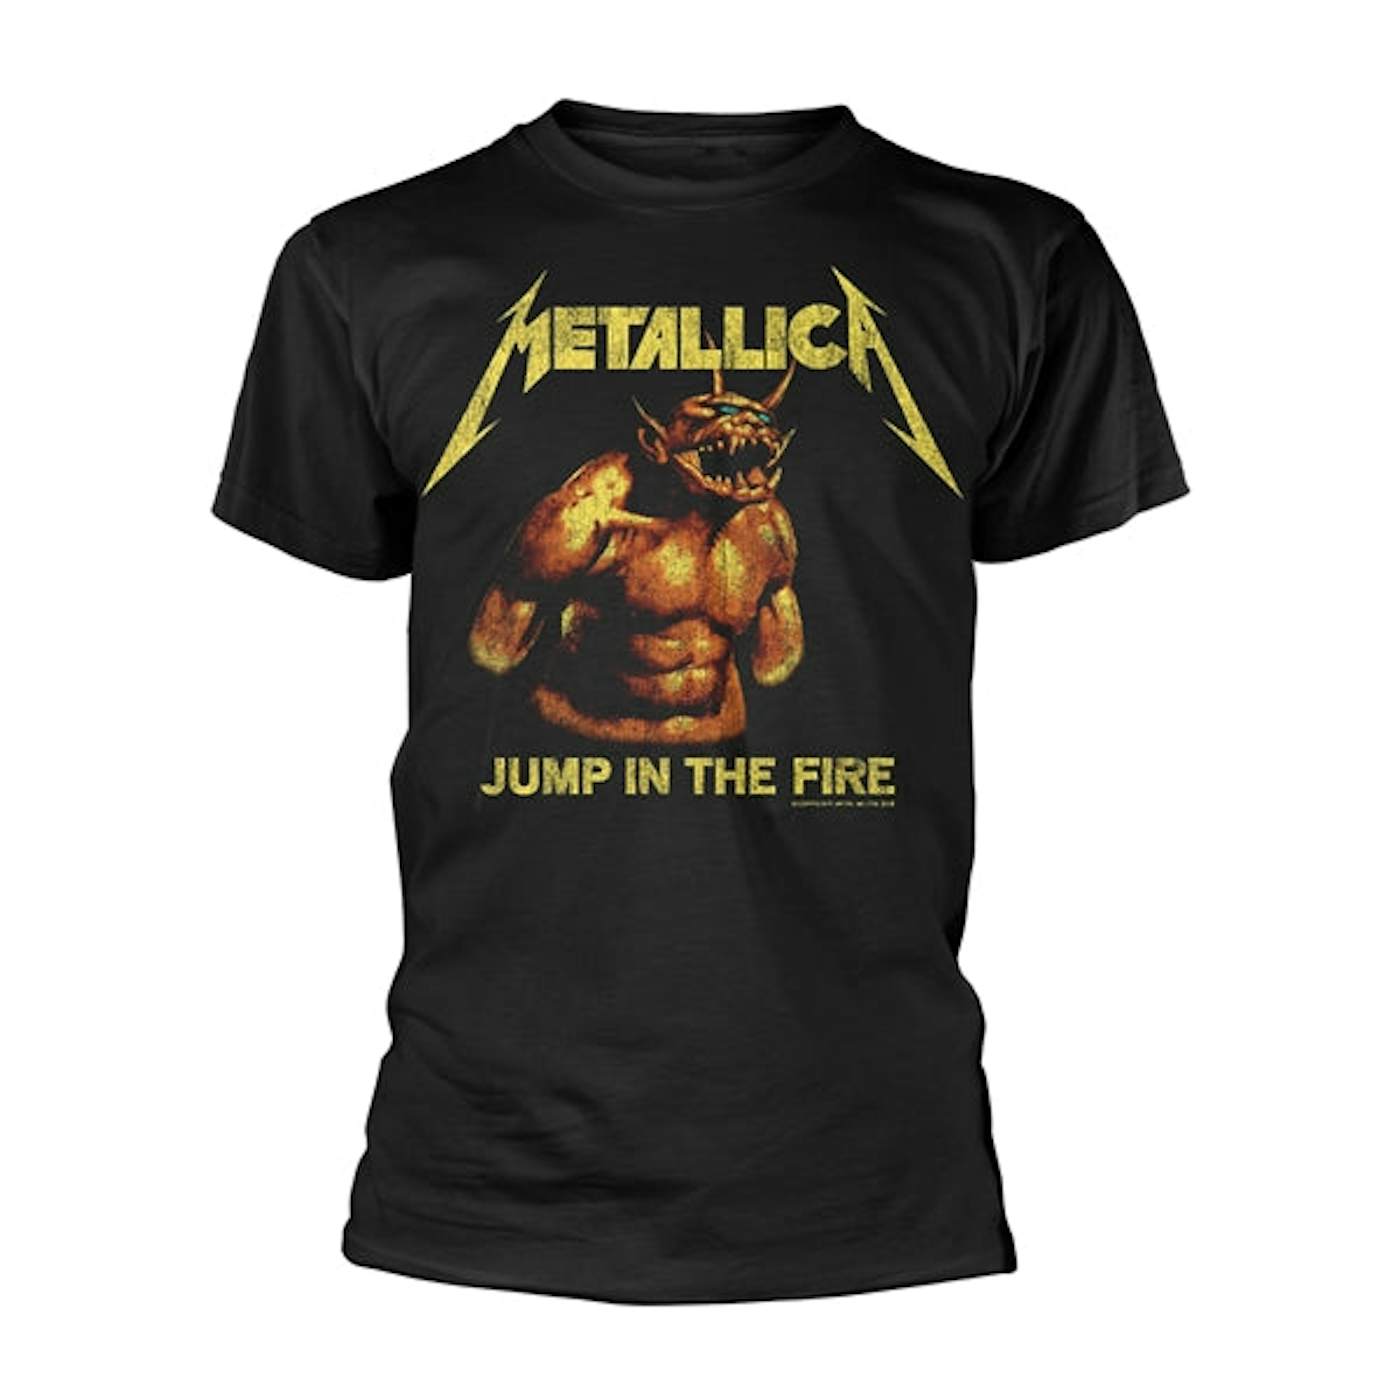 Metallica T Shirt - Jump In The Fire Vintage